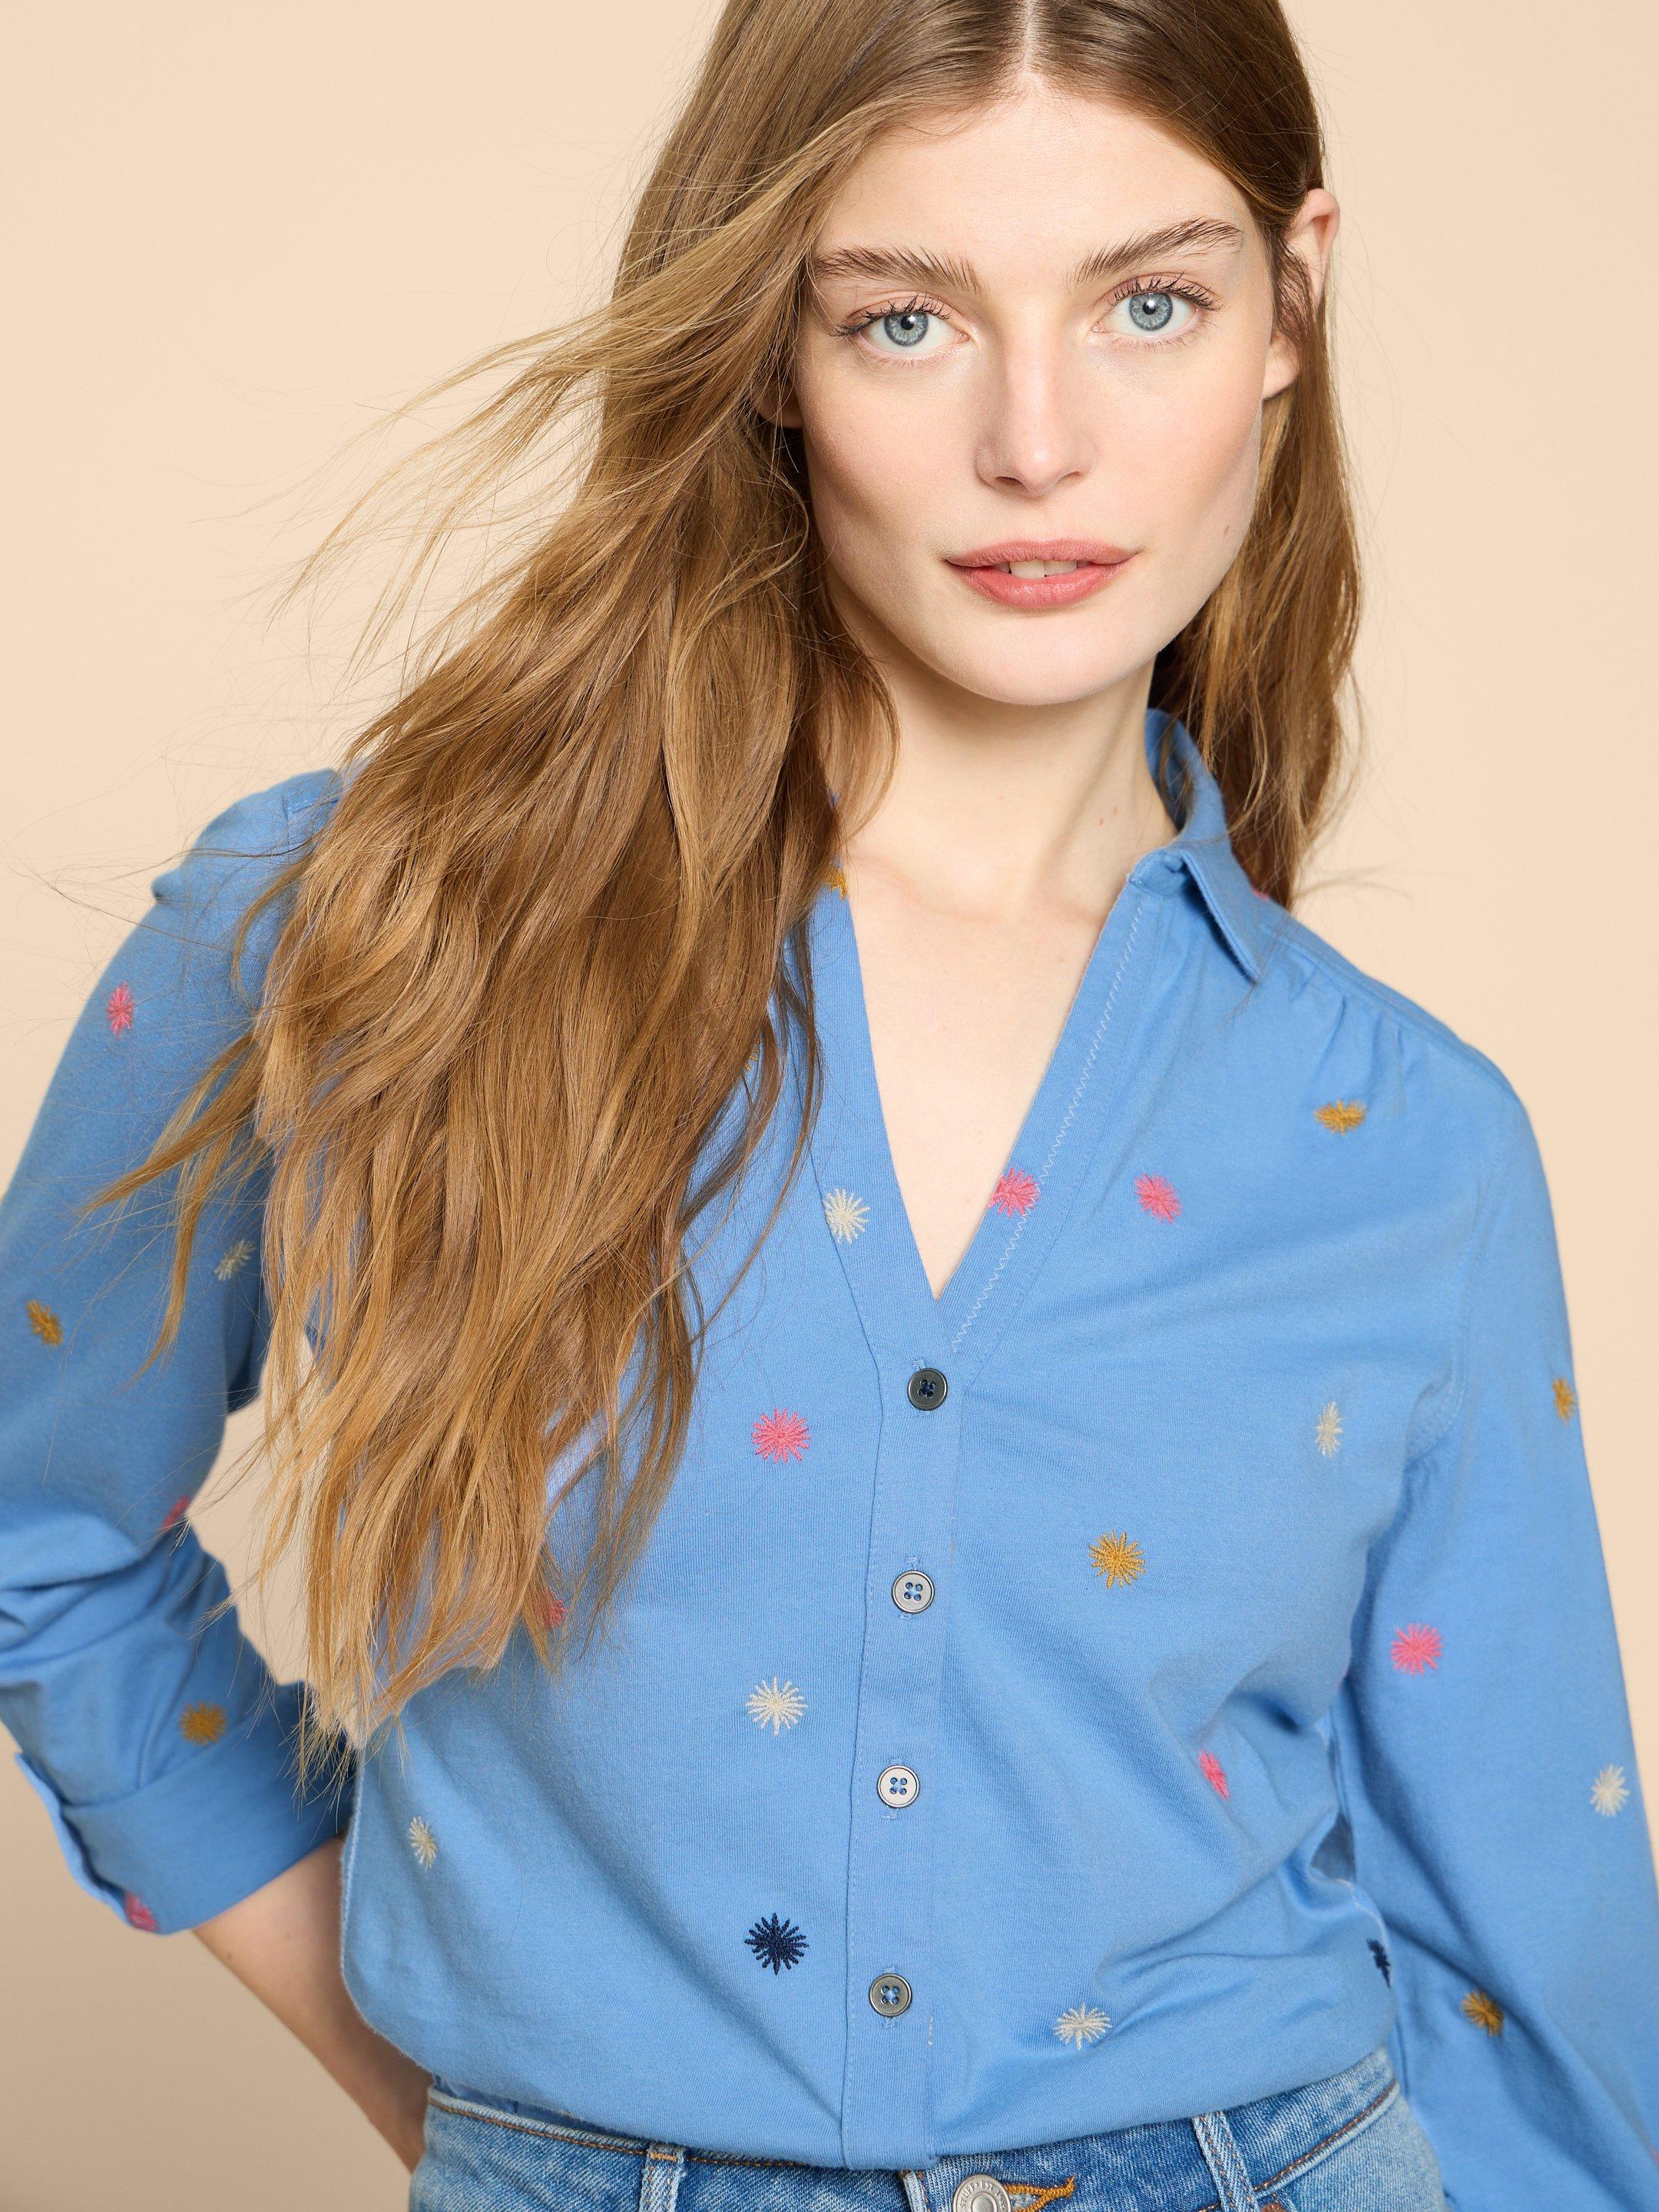 ANNIE JERSEY EMBROIDERED SHIRT in BLUE MLT - MODEL DETAIL